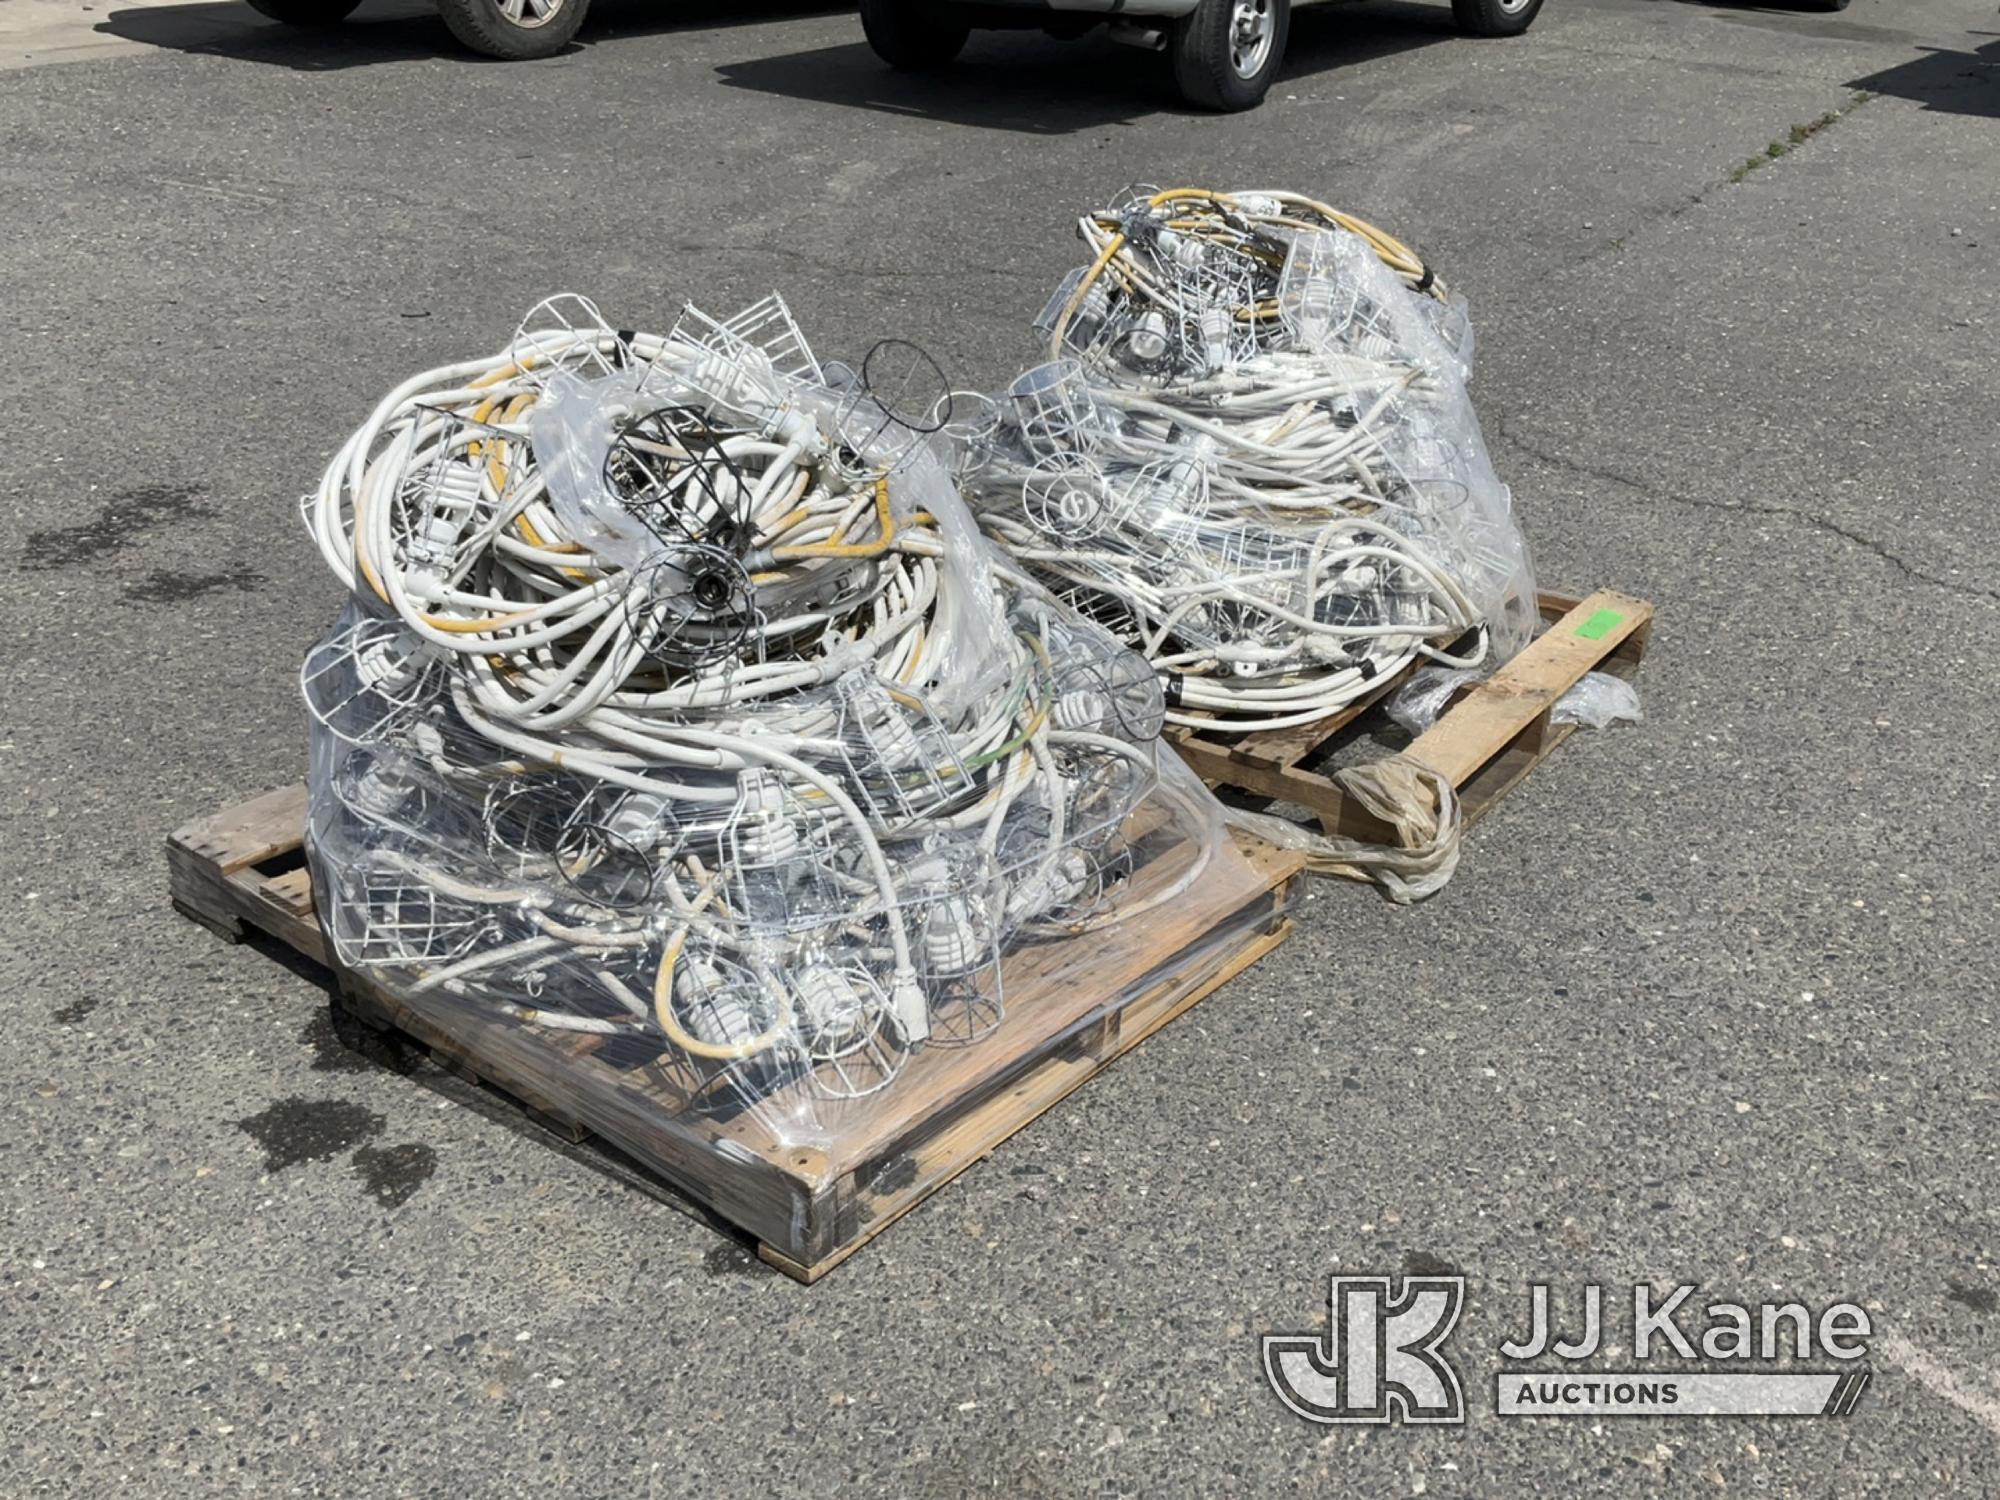 (Dixon, CA) 2 Pallets of String Lights (Used) NOTE: This unit is being sold AS IS/WHERE IS via Timed